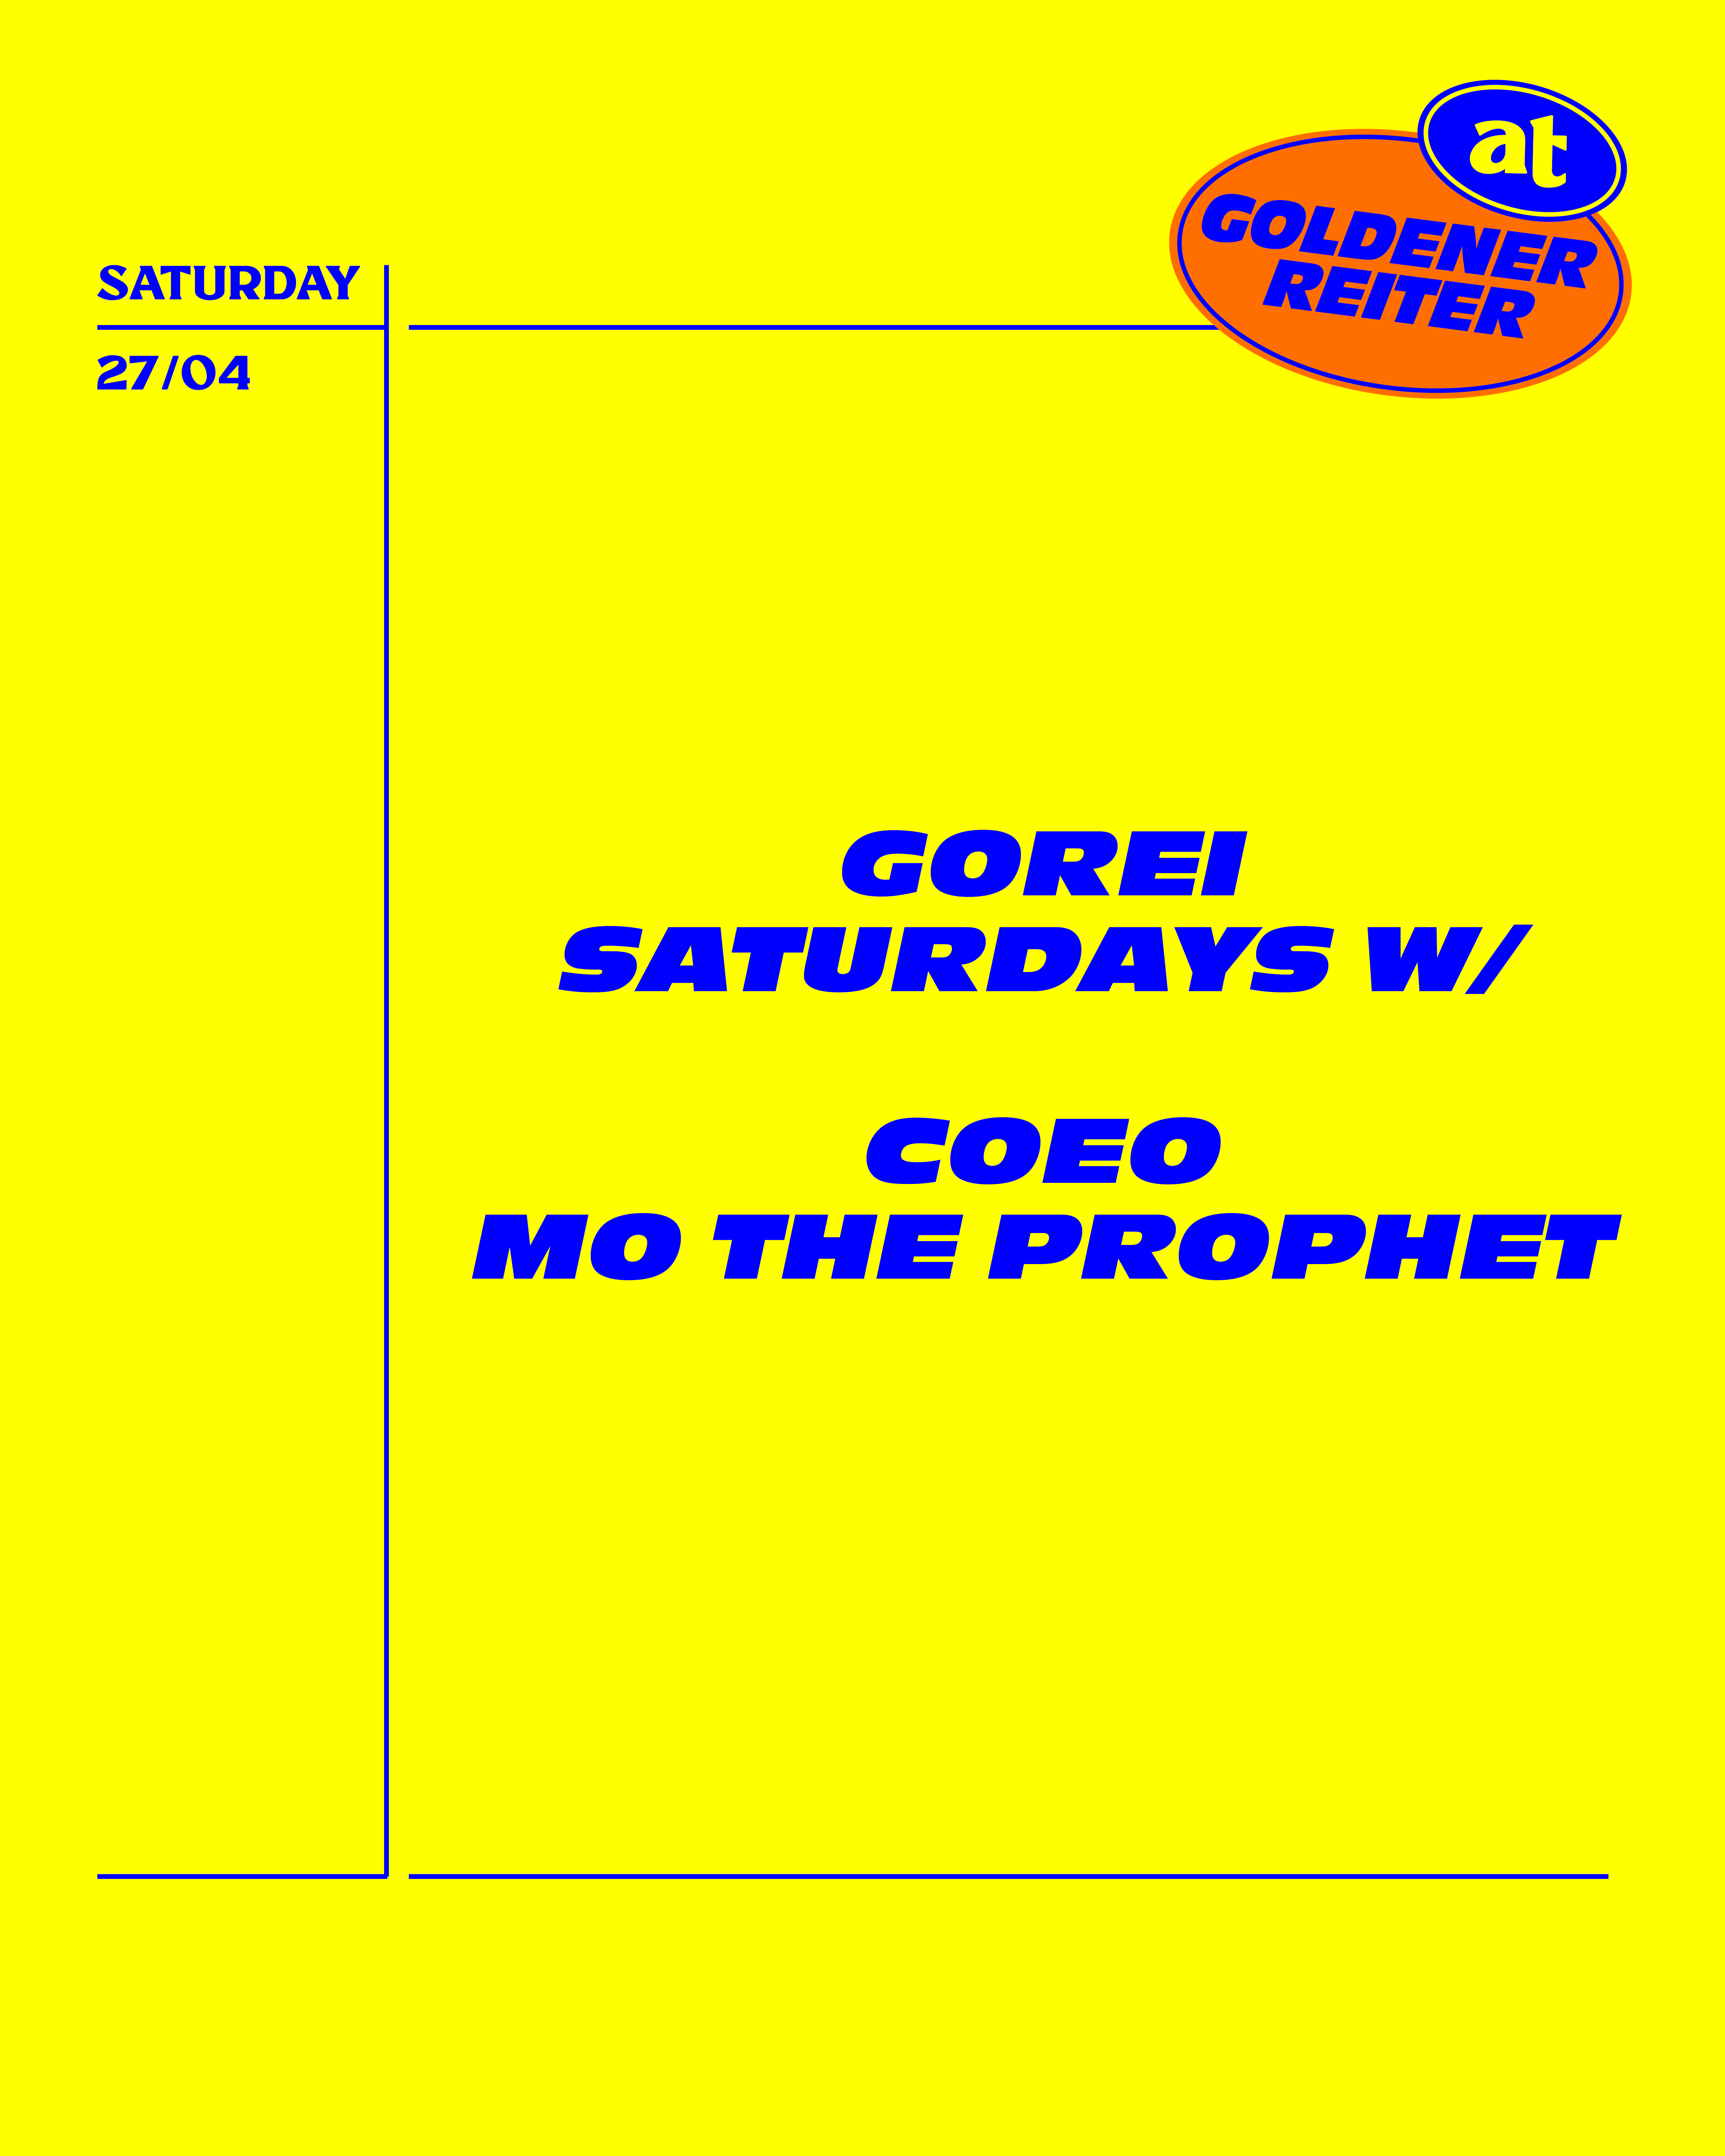 GoRei Saturdays with COEO, Mo the Prophet - フライヤー表